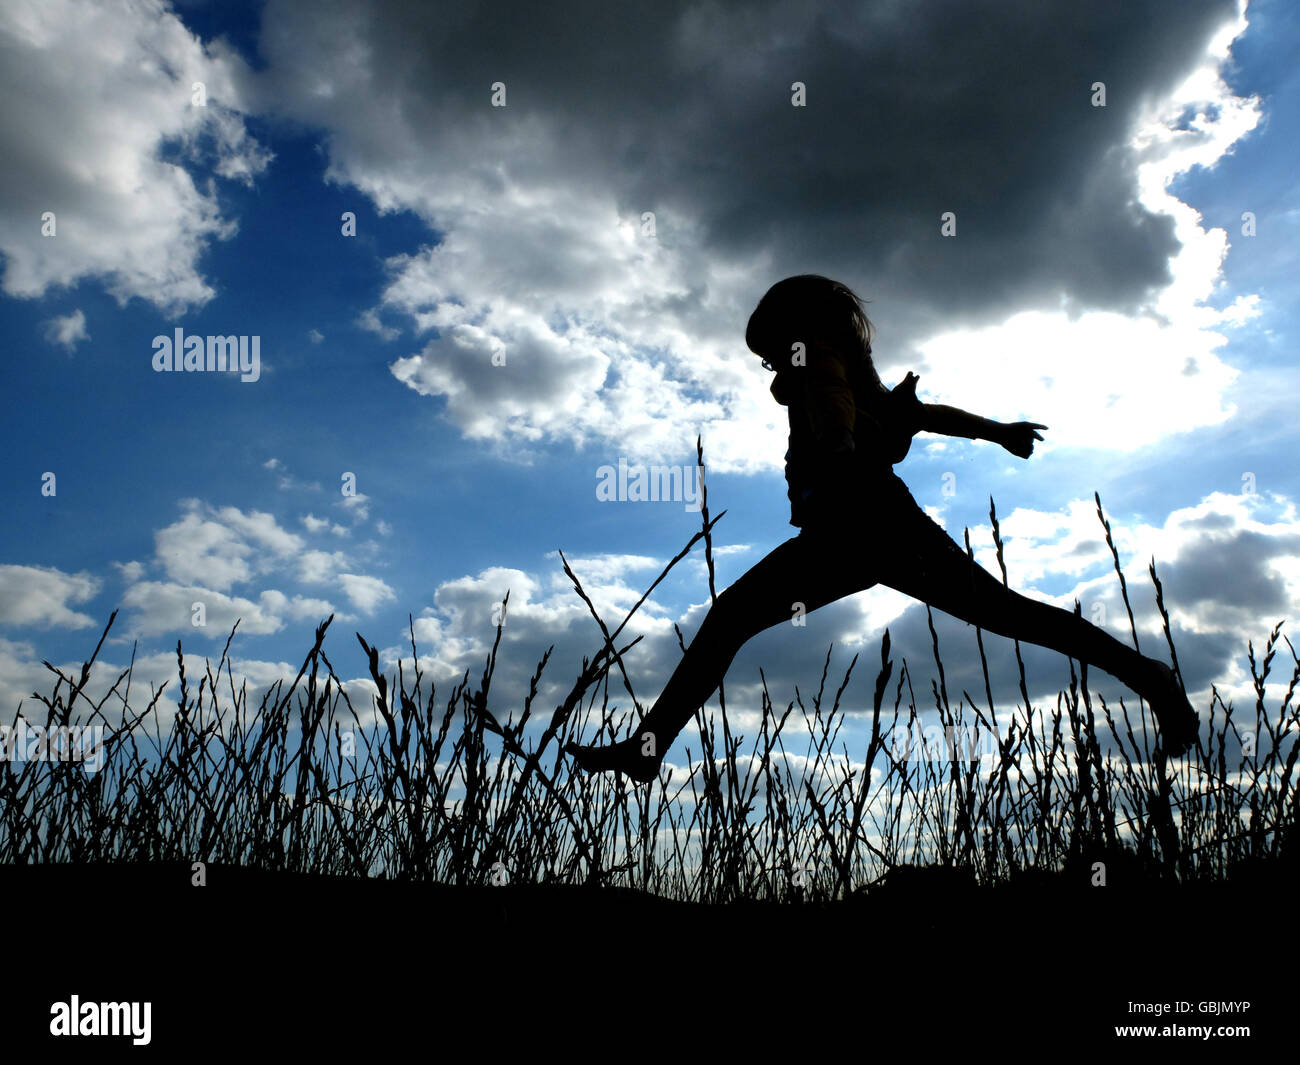 Silhouette of a child running and jumping in long grass Stock Photo